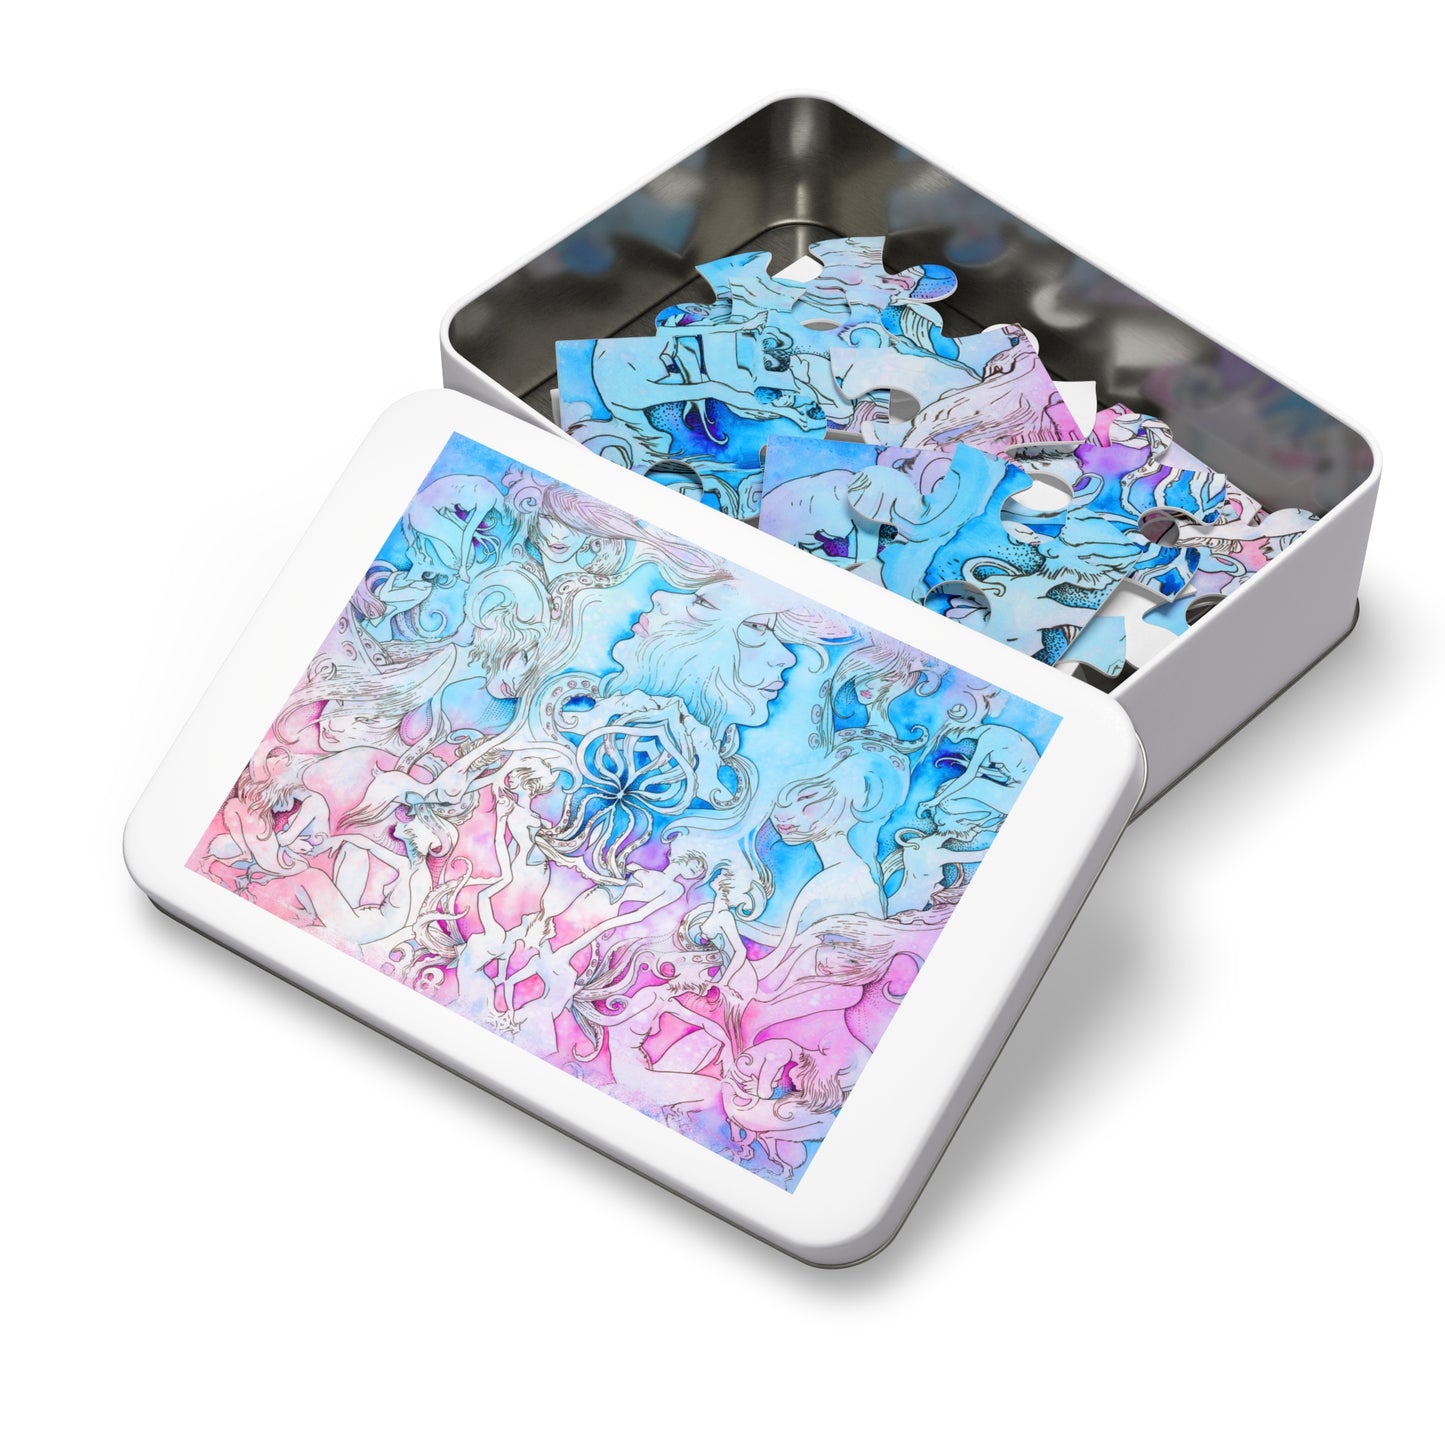 Birth Of Density Watercolor Art Jigsaw Puzzle